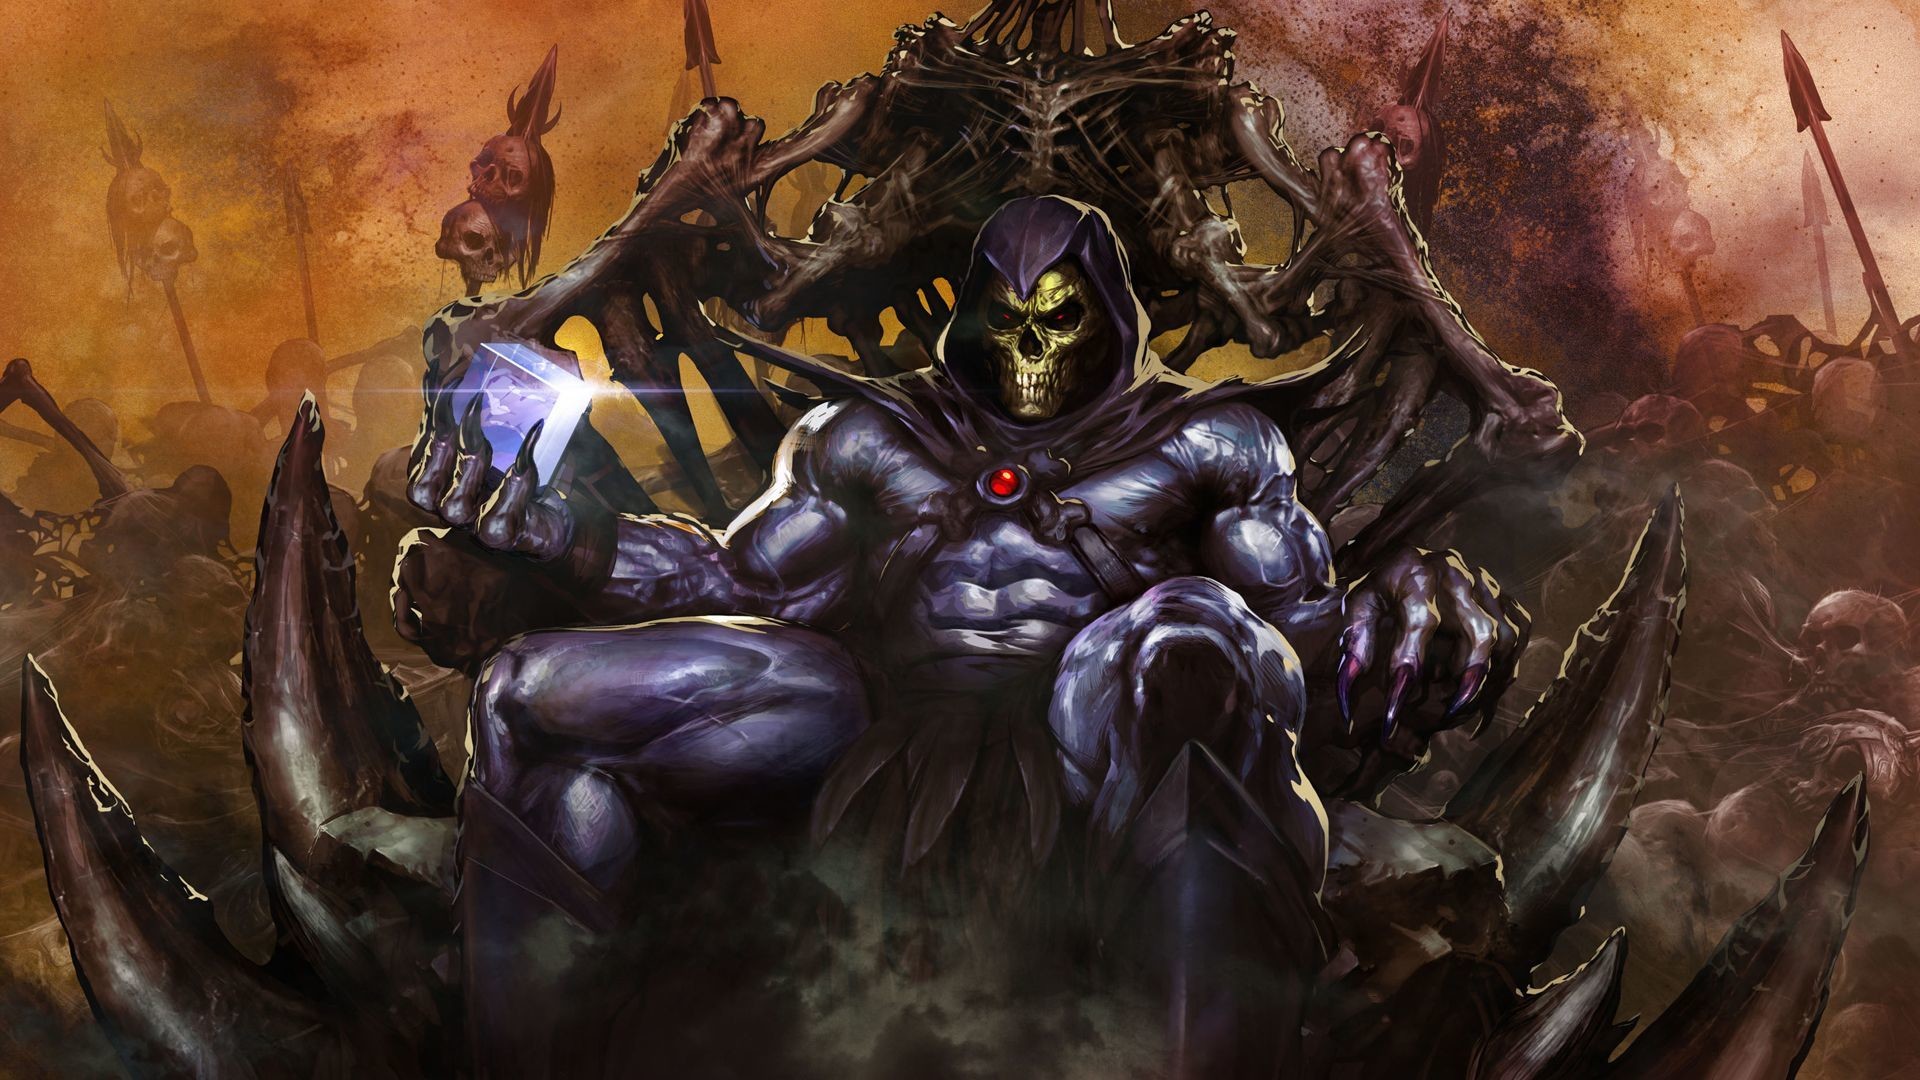 1920x1080 ... he man and the masters of the universe wallpaper 46424 ...